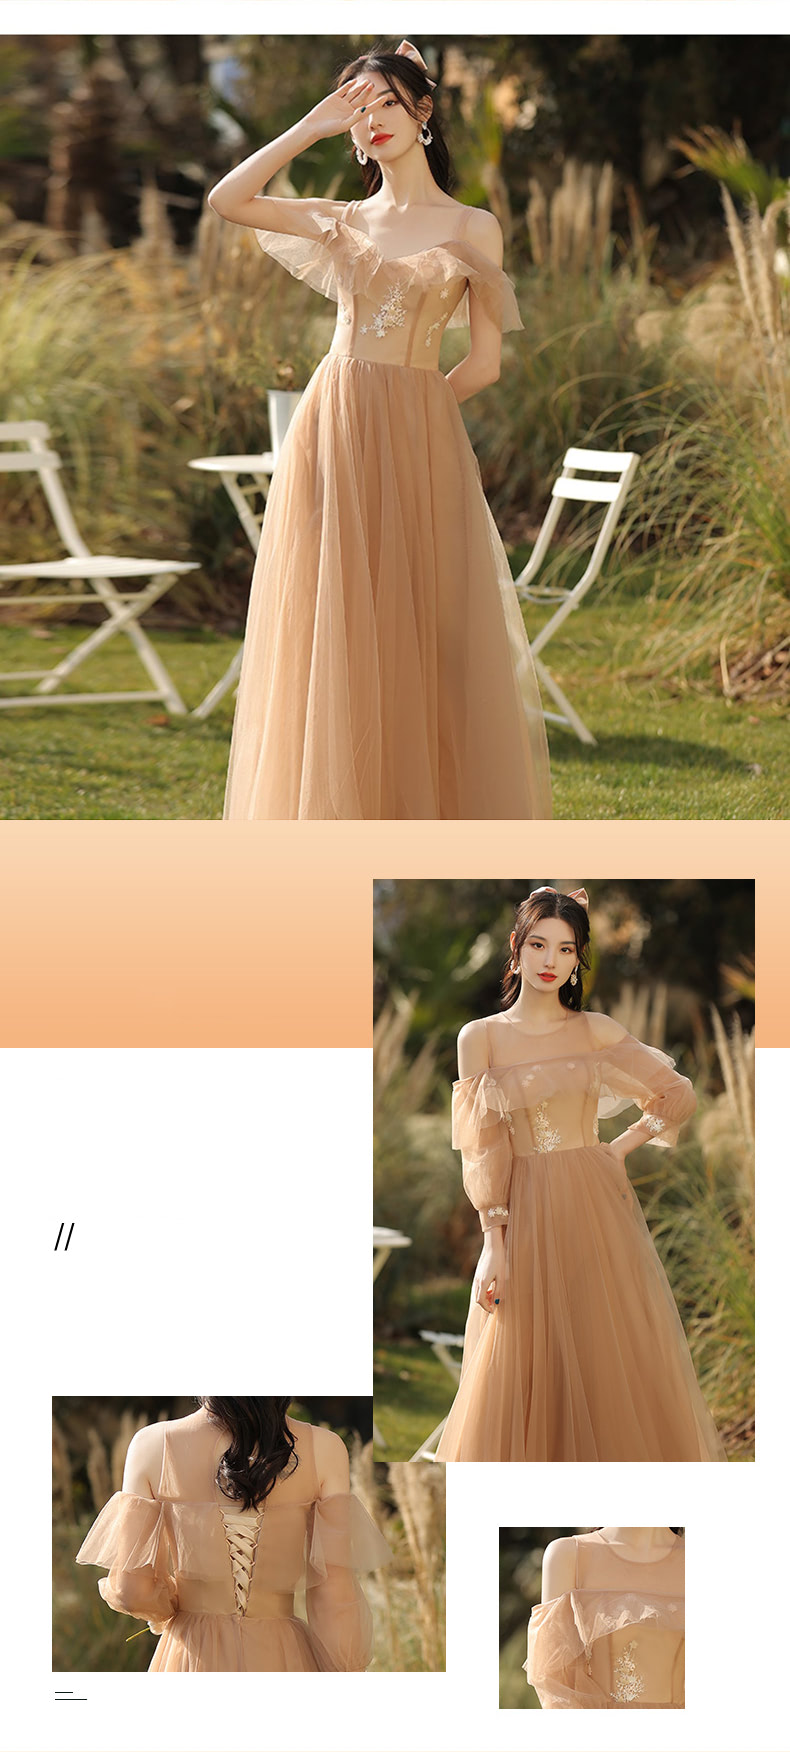 Fairy-Champagne-Bridesmaid-Long-Dress-Sweet-Evening-Formal-Gown12.jpg